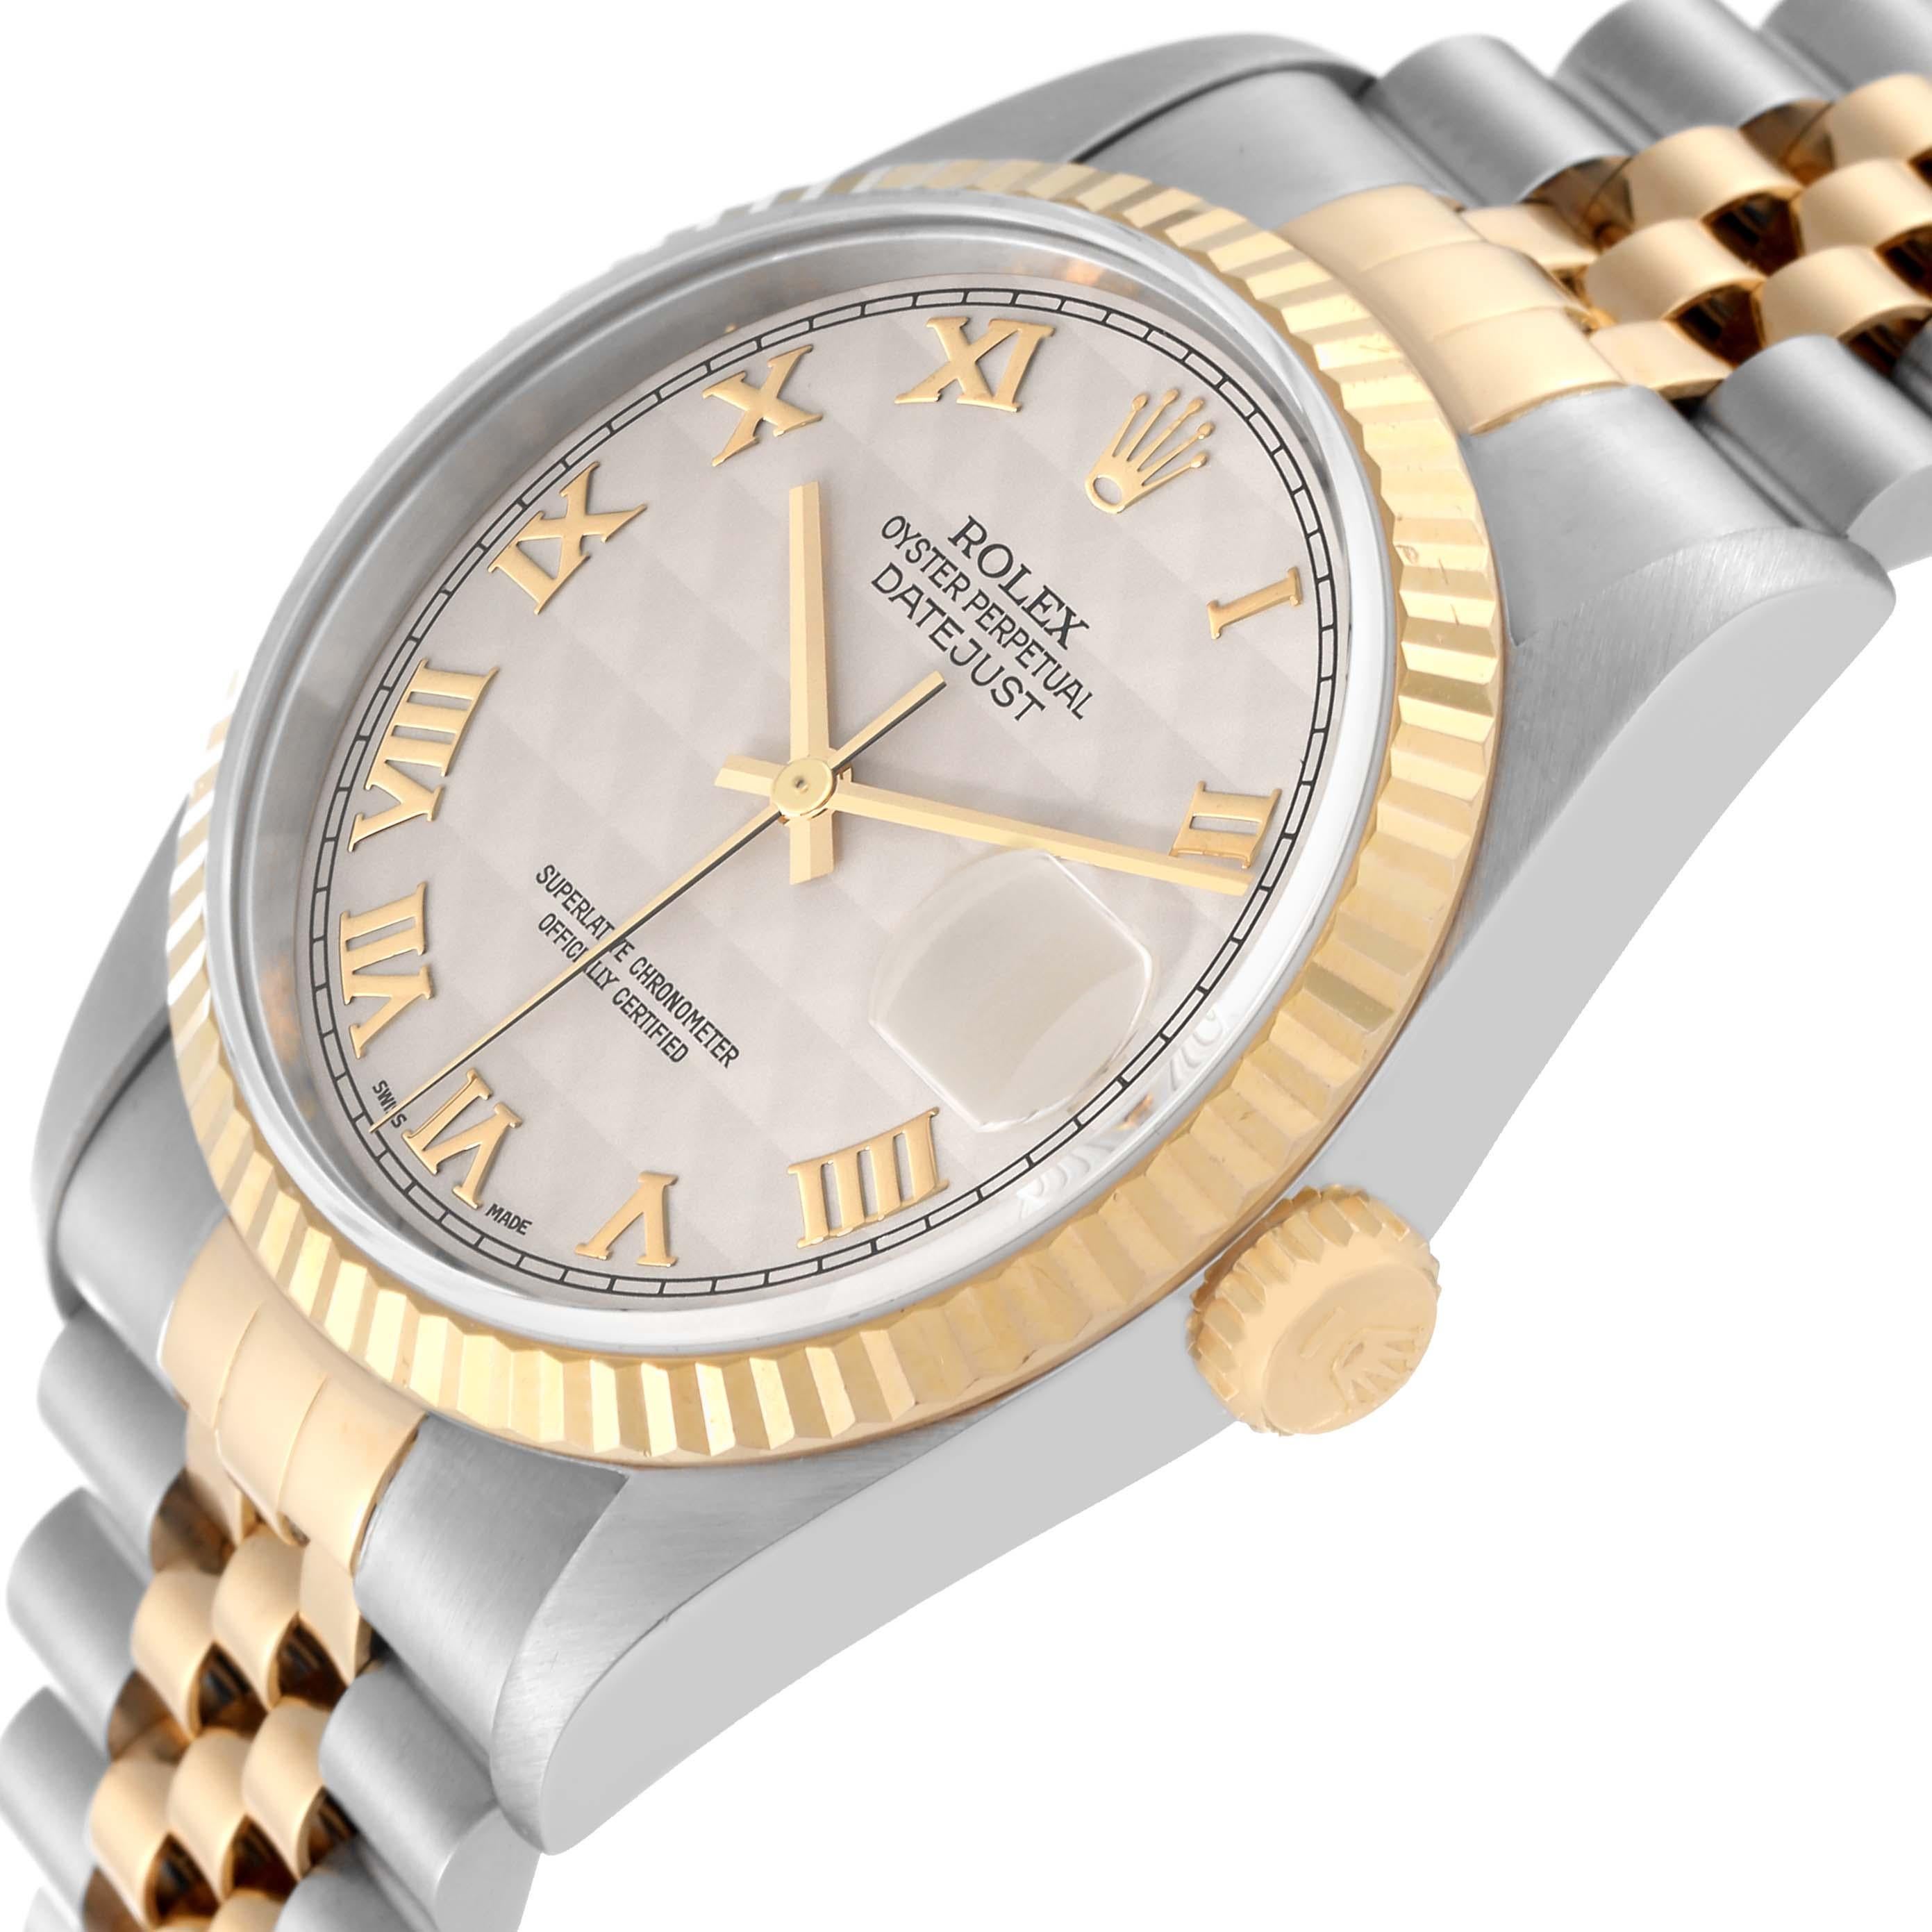 Rolex Datejust Steel Yellow Gold Ivory Pyramid Dial Mens Watch 16233 Box Papers In Excellent Condition For Sale In Atlanta, GA